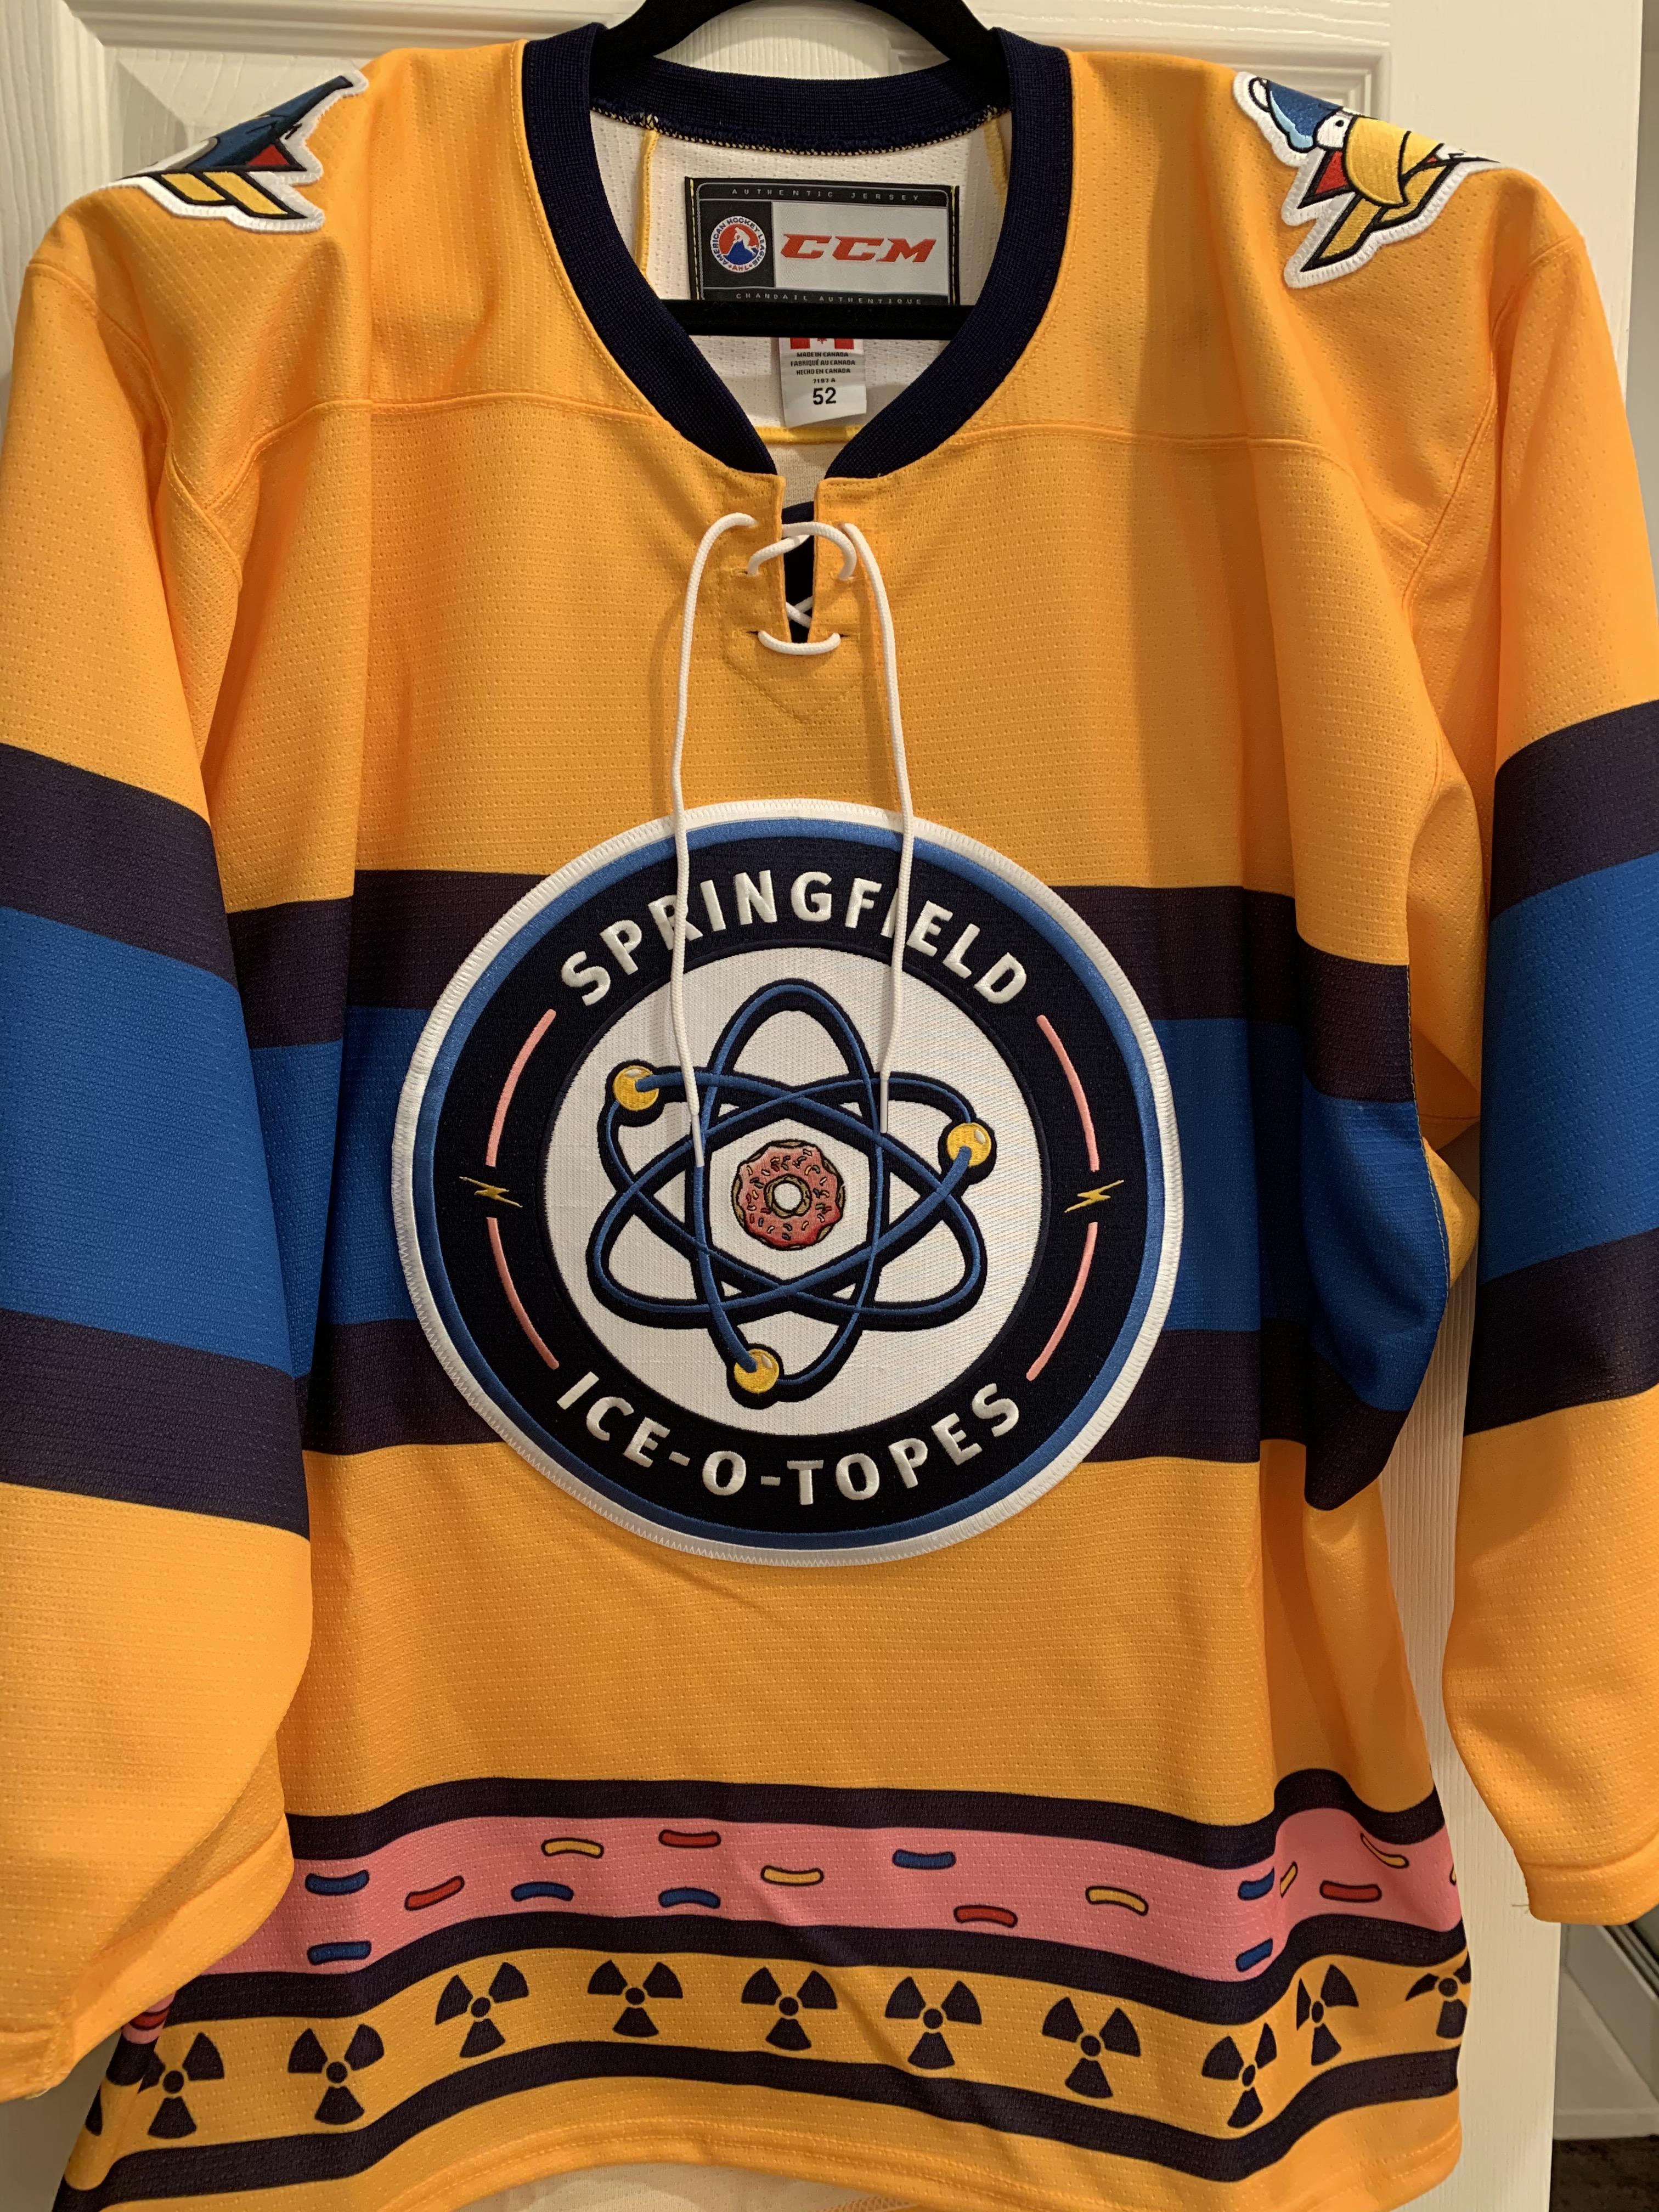 Mail day! Worth the wait!